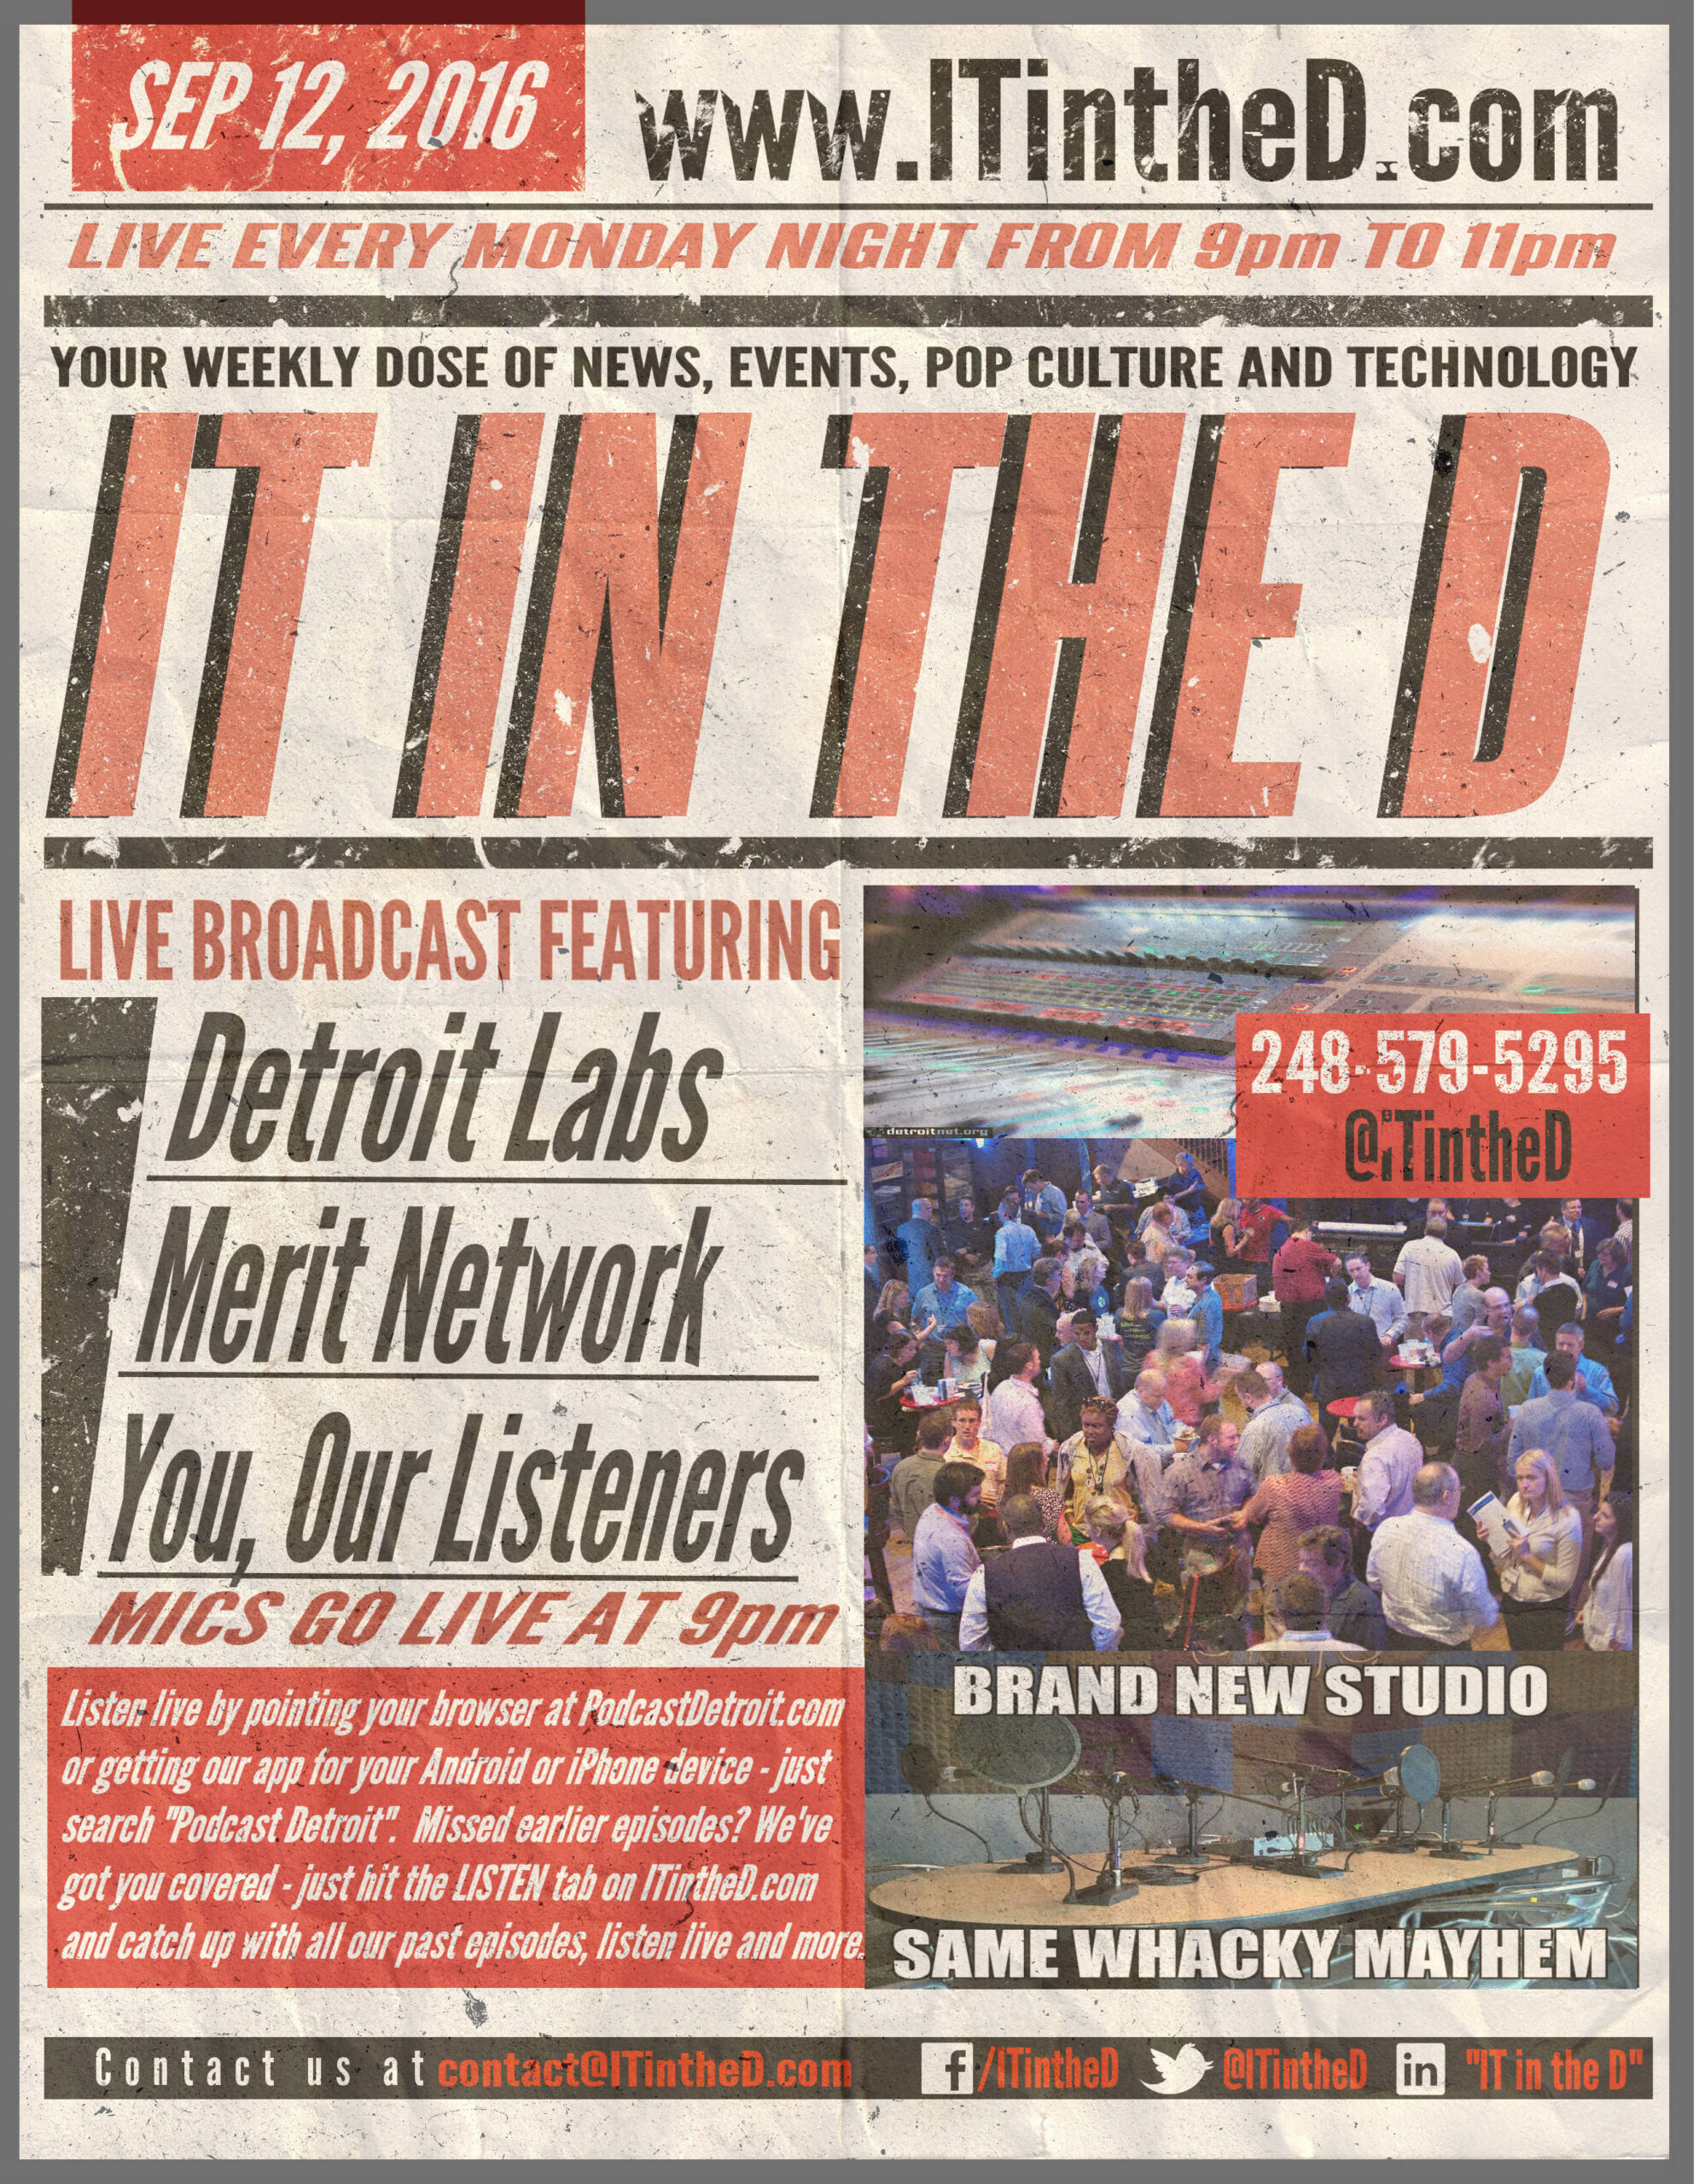 Detroit Labs and Merit Network In Studio Tonight, Pink Slip Party Thursday, Blogs, Updates and More for 9/12/2016